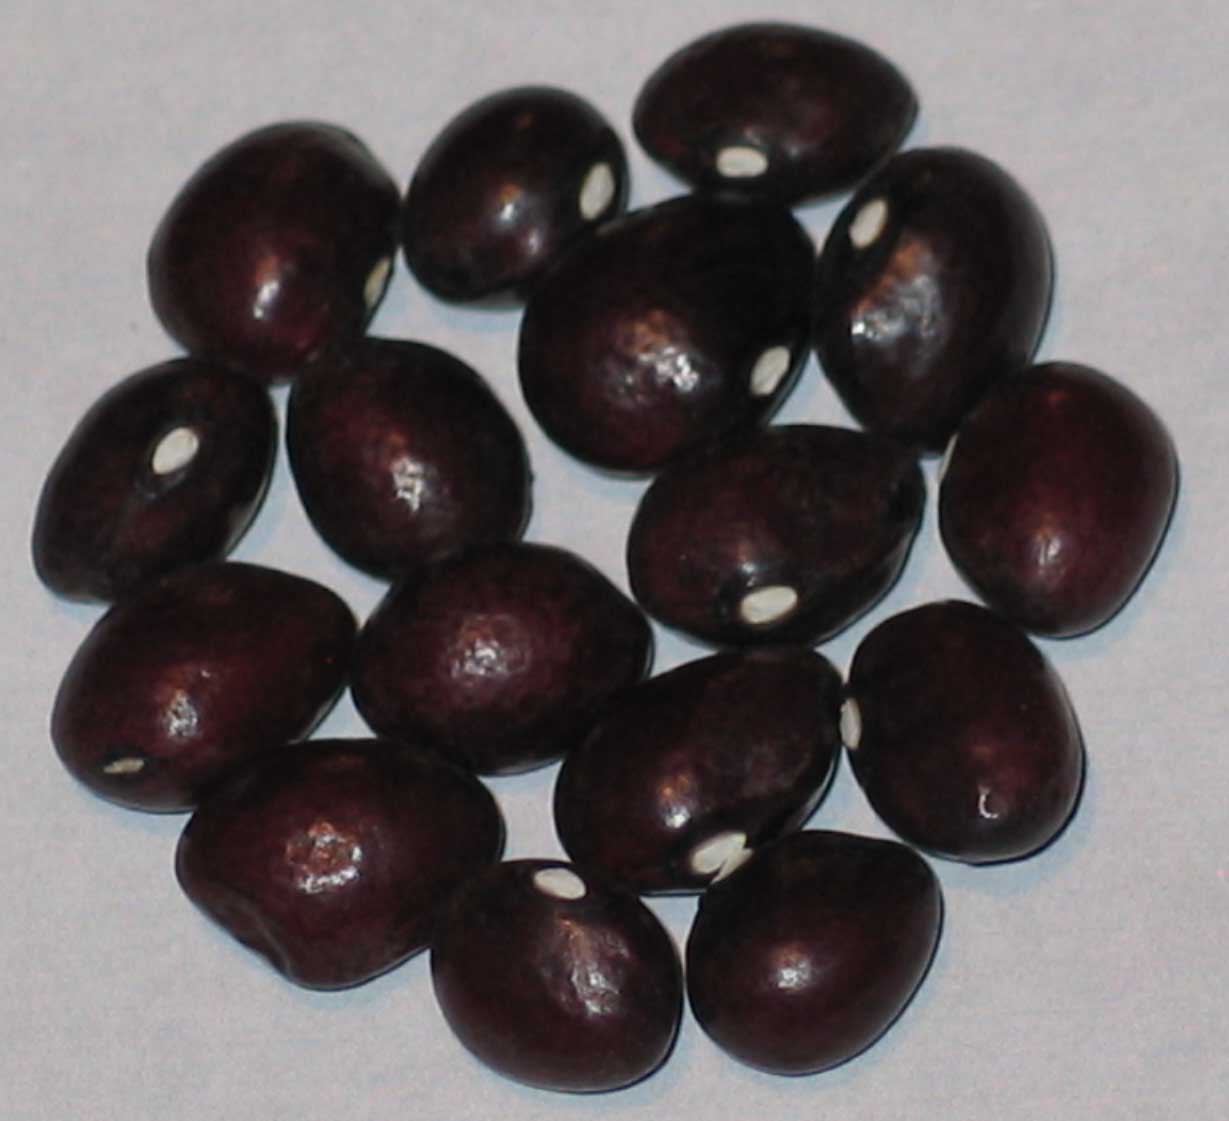 image of Arlington Red Cranberry beans